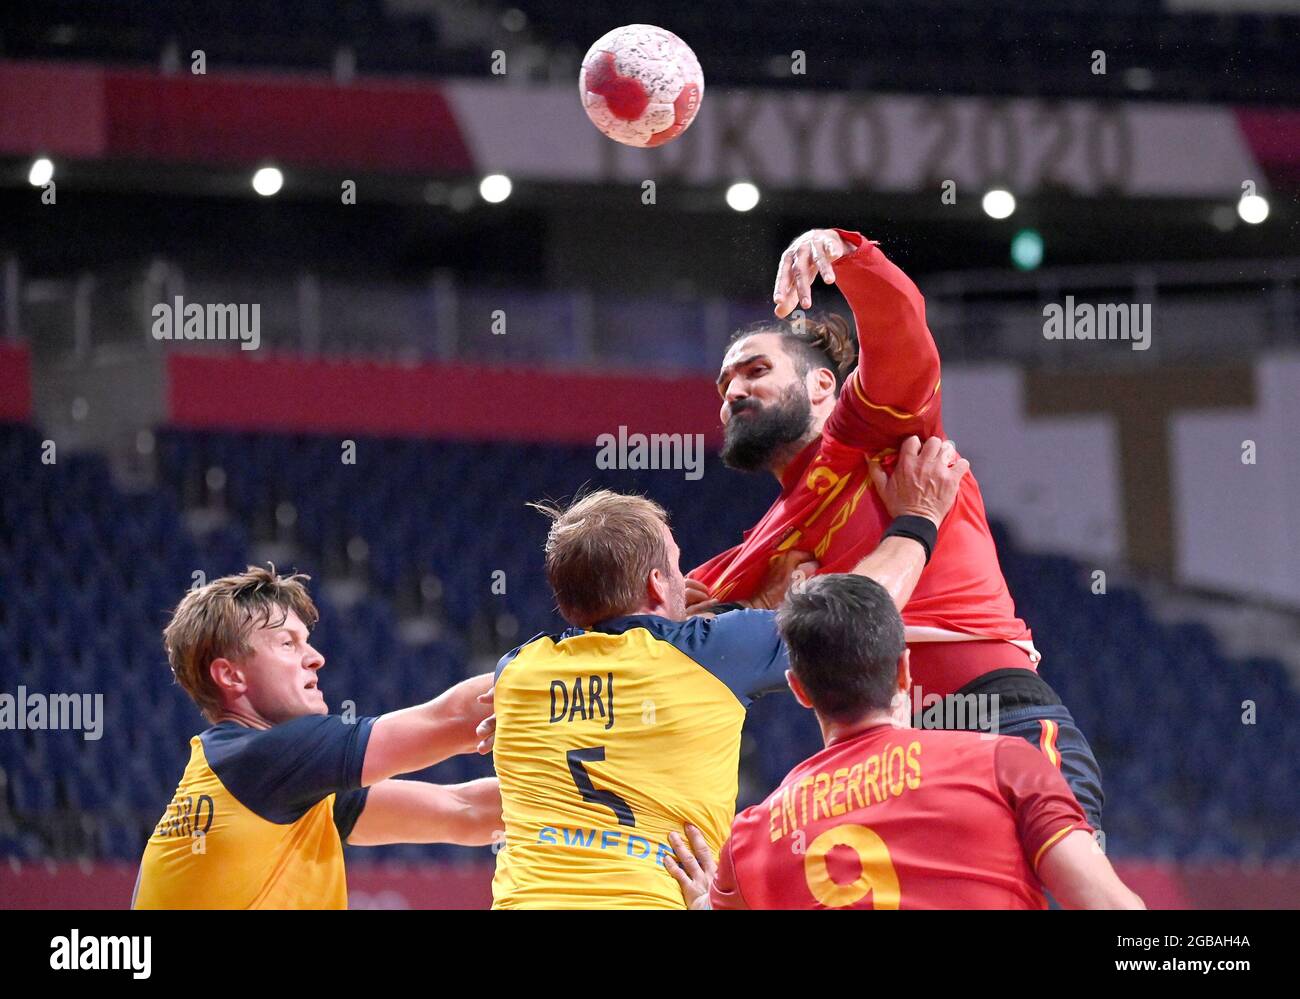 Tokyo, Japan. 3rd Aug, 2021. Jorge Maqueda Peno (top) of Spain shoots during the handball men's quarterfinal between Sweden and Spain at the Tokyo 2020 Olympic Games in Tokyo, Japan, Aug. 3, 2021. Credit: Guo Chen/Xinhua/Alamy Live News Stock Photo